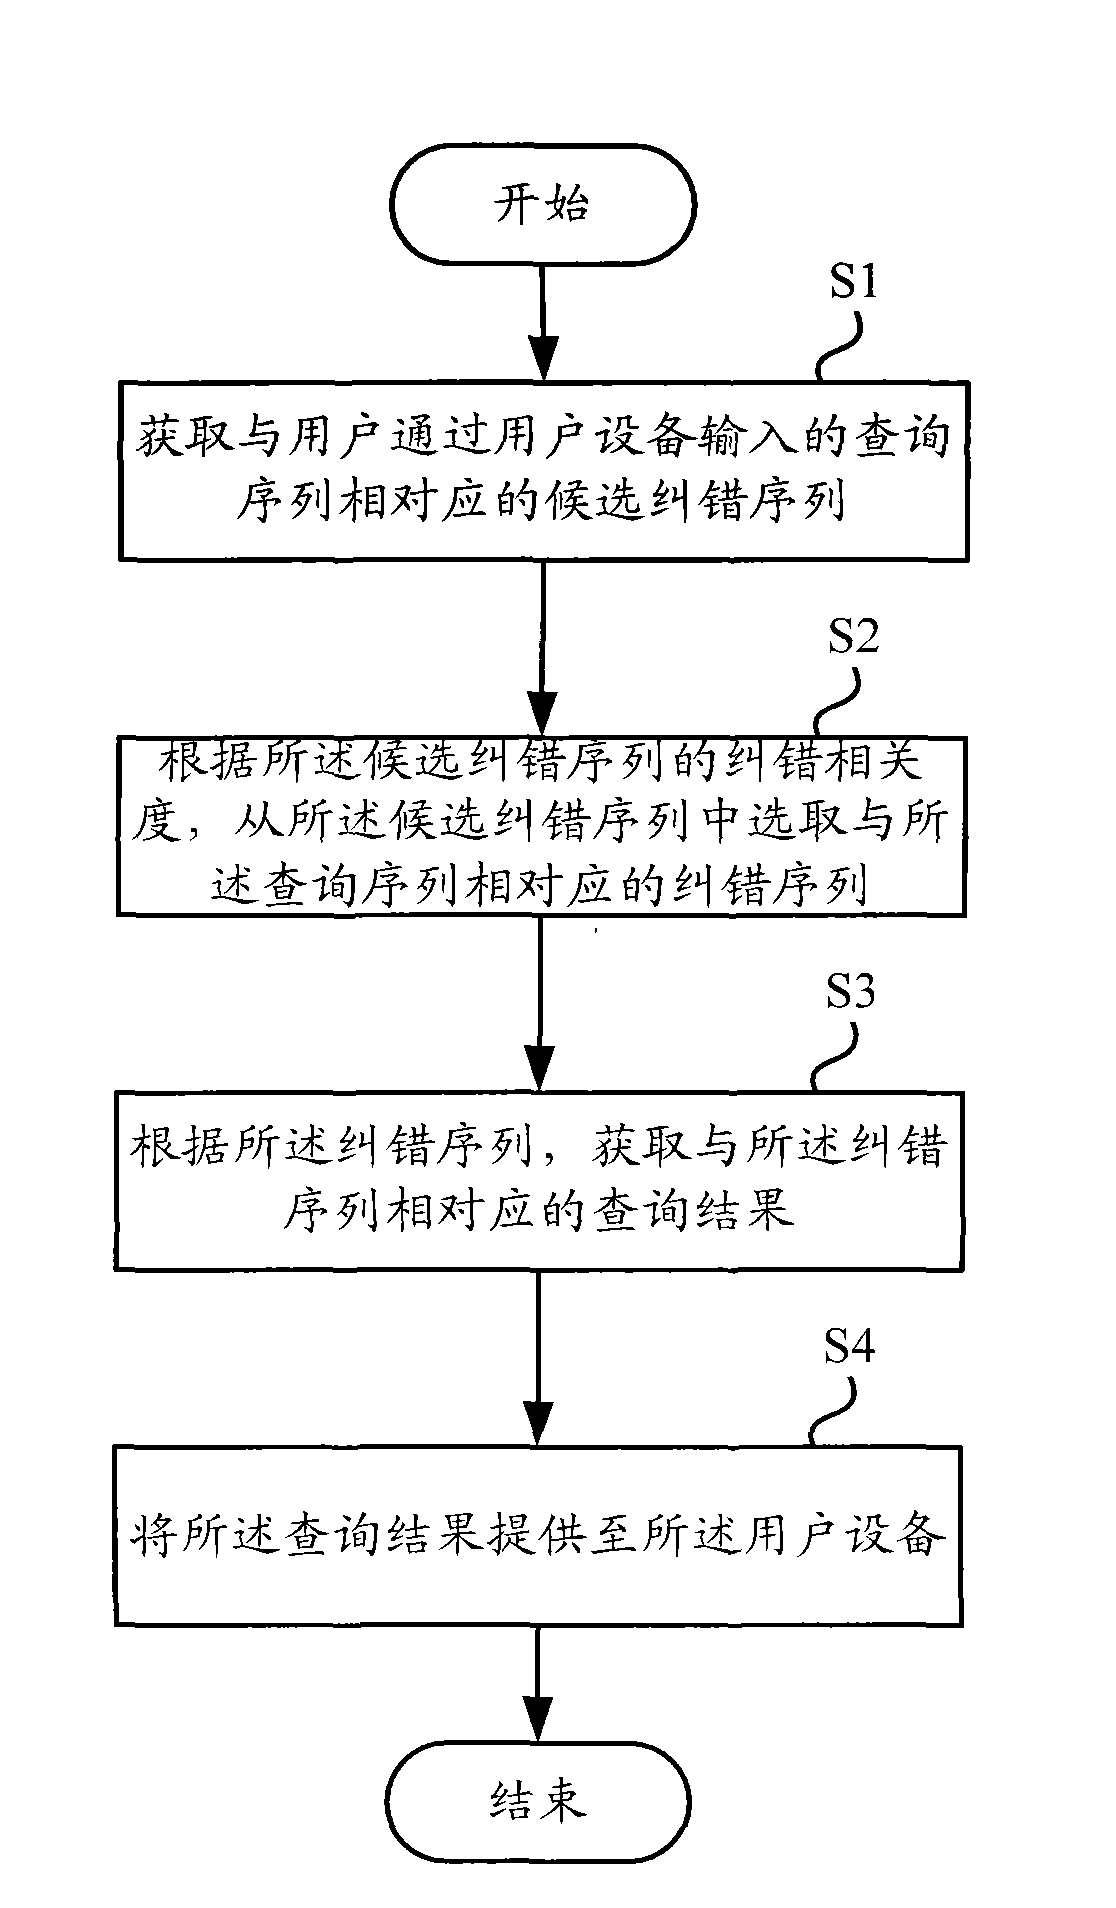 Equipment and method for error correction of query sequence based on degree of error correction association